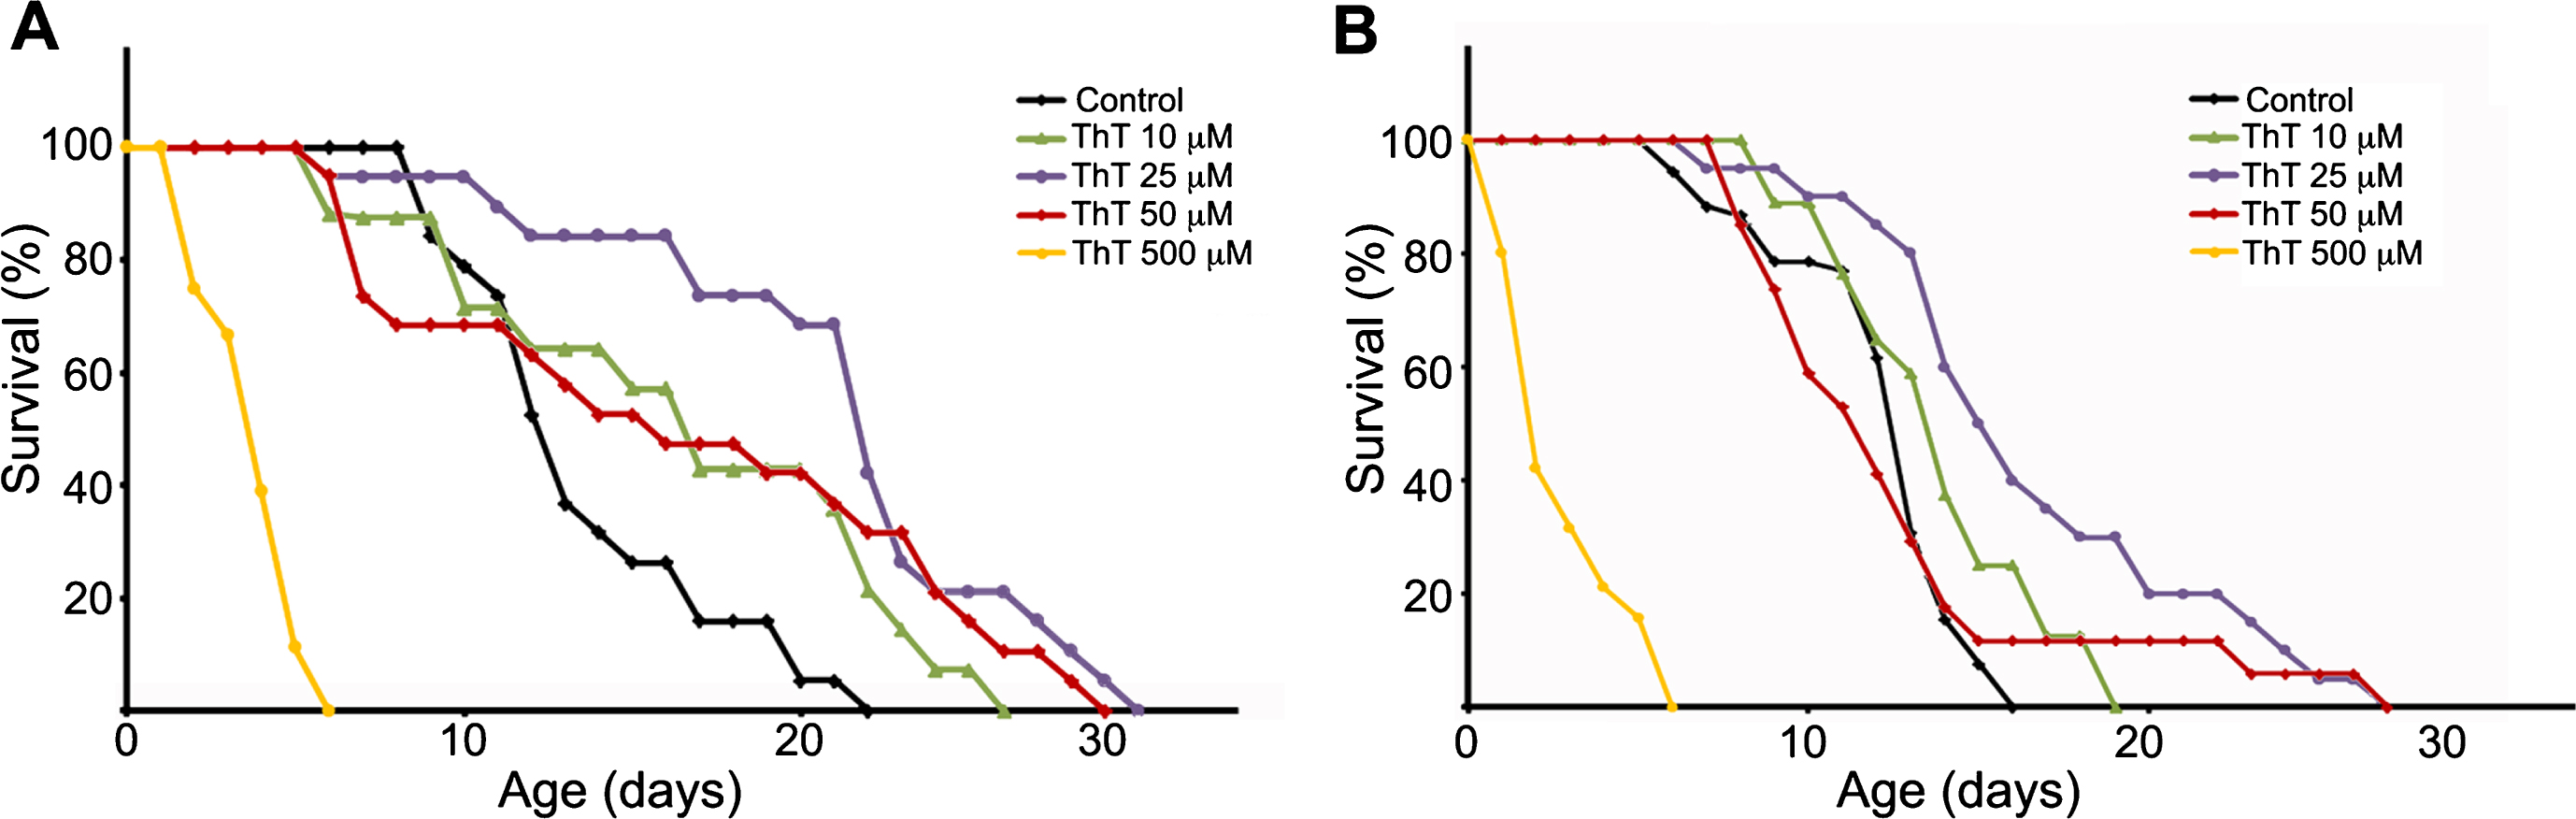 Thioflavin T (ThT) extends lifespan of a C. elegans model of tauopathy. Dose–response Kaplan–Meier survival curve of synchronized populations of wild-type (N2) worms (A) or mutant aex-3/T337 worms (B), exposed to 0 μM (control) to 500 μM ThT at 20°C. These data correspond to one representative experiment out of three independent assays (n = 20 worms per experiment and dose).